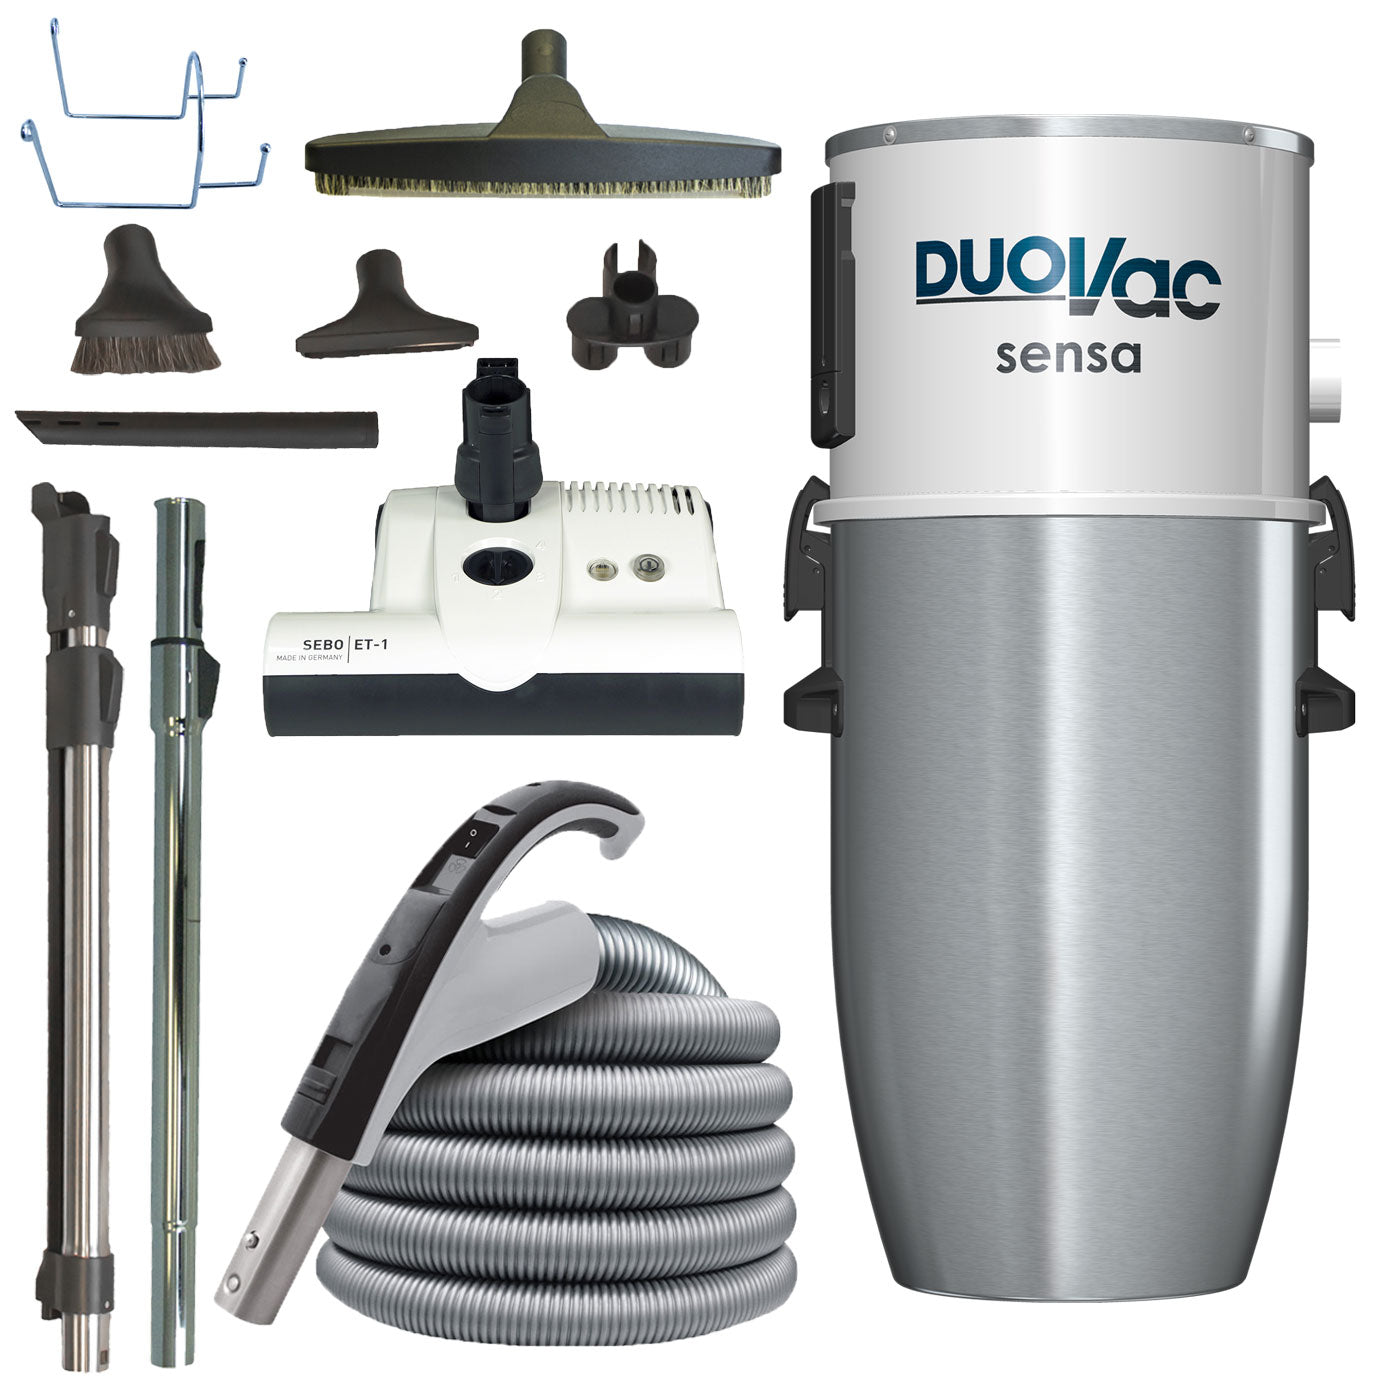 DuoVac Sensa / SEBO ET1 Deluxe Electric Central Vacuum Package